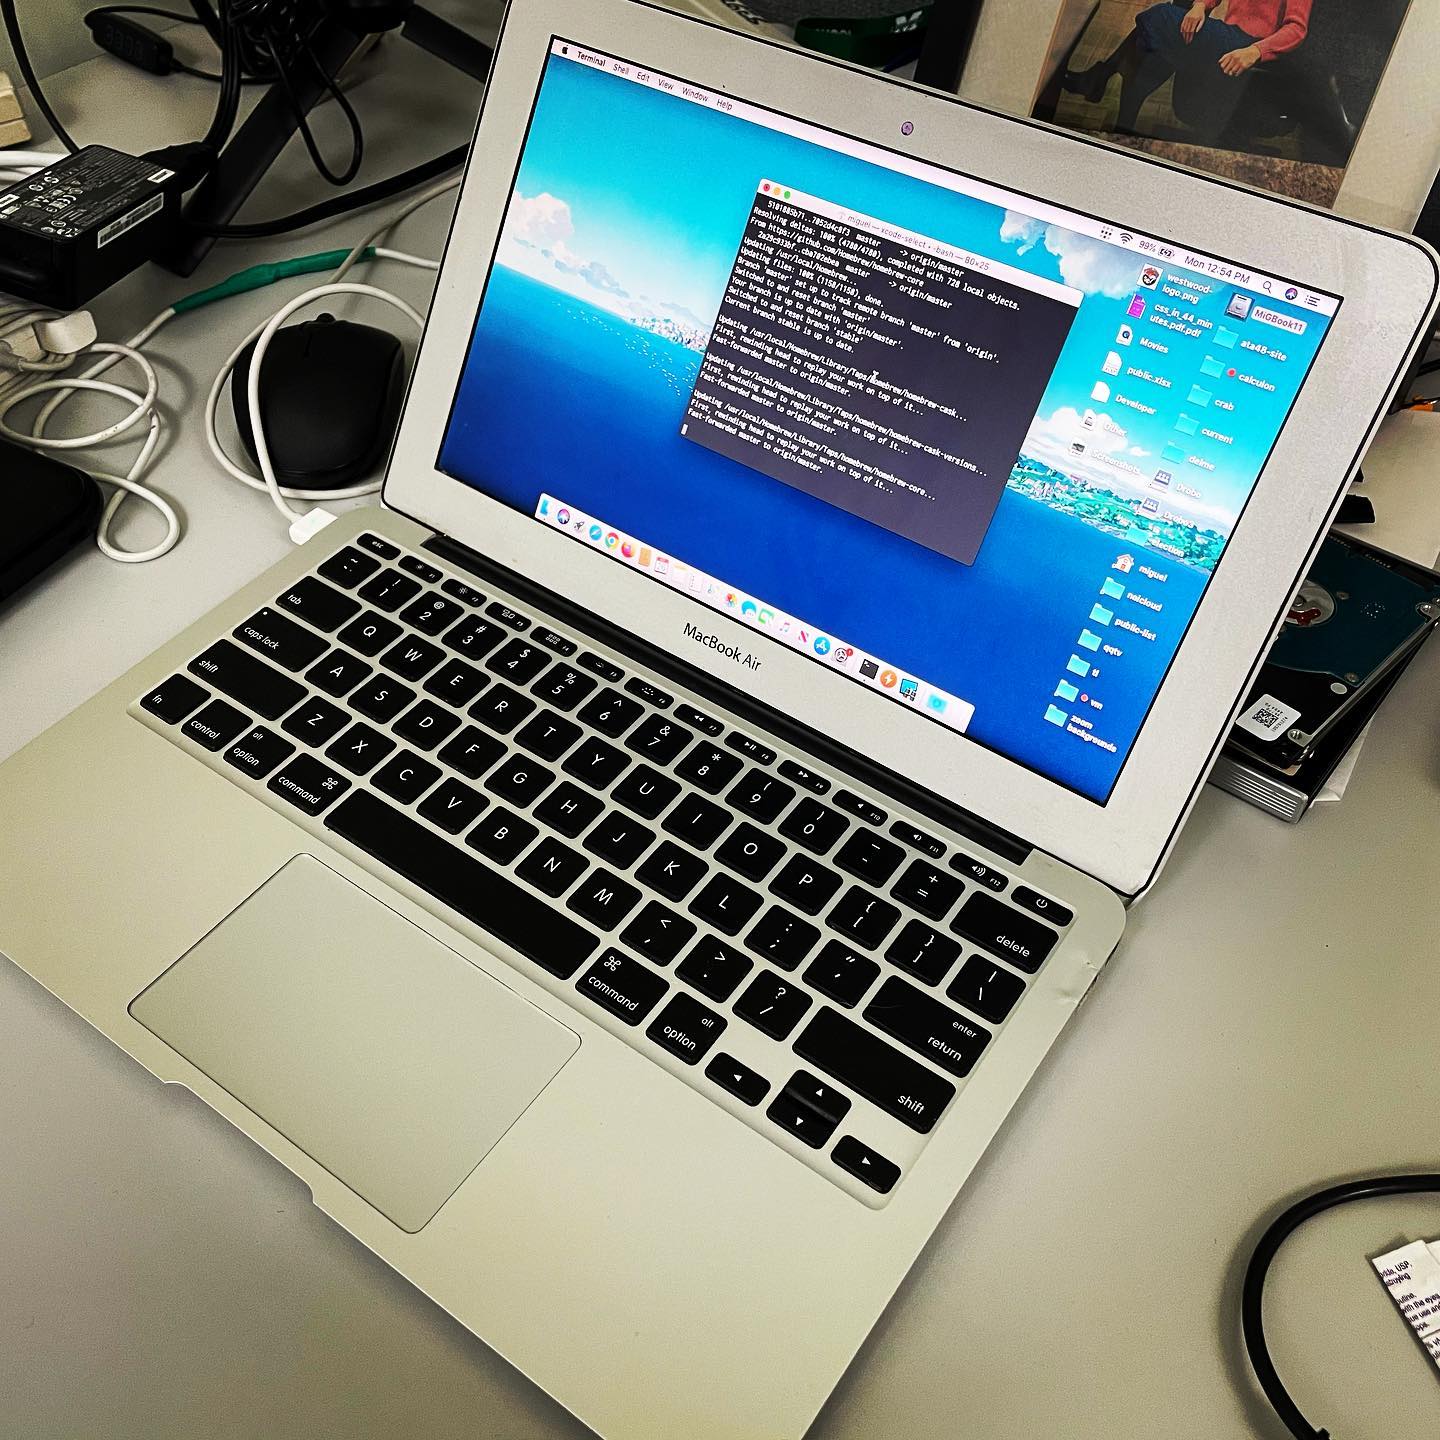 This is my 11â€ MacBook Air from 2011.  Still my favourite computer of all time.  It was handed down to my kids, but Iâ€™ve recently reclaimed it and upgraded it to Catalina. Now itâ€™s my â€œdemo computerâ€ for presentations, screen recordings, and online classes.